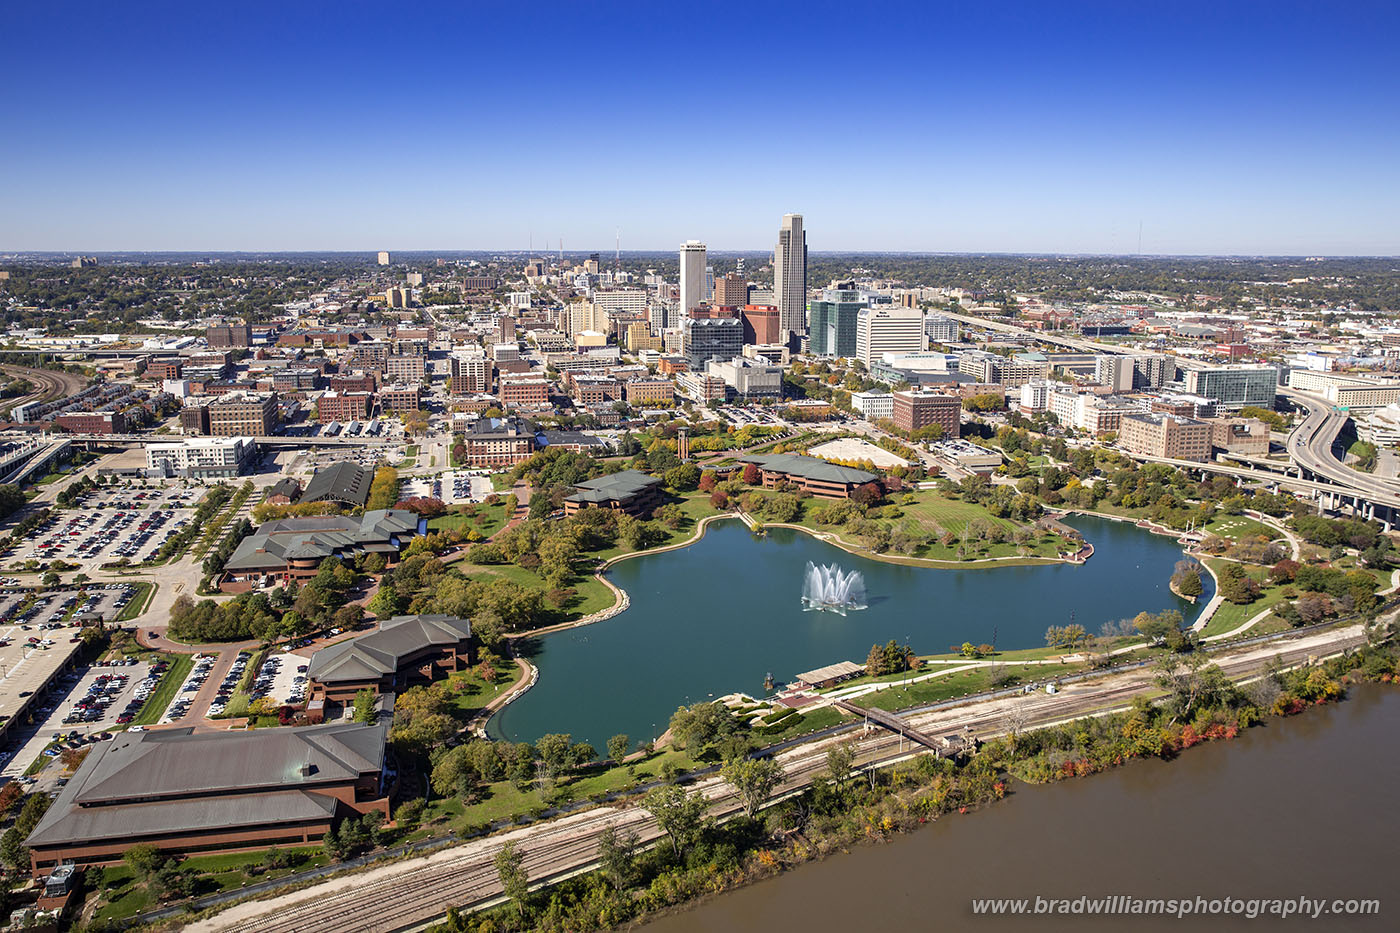 Aerial photo of Omaha, Nebraska photographed from helicopter in 2018.